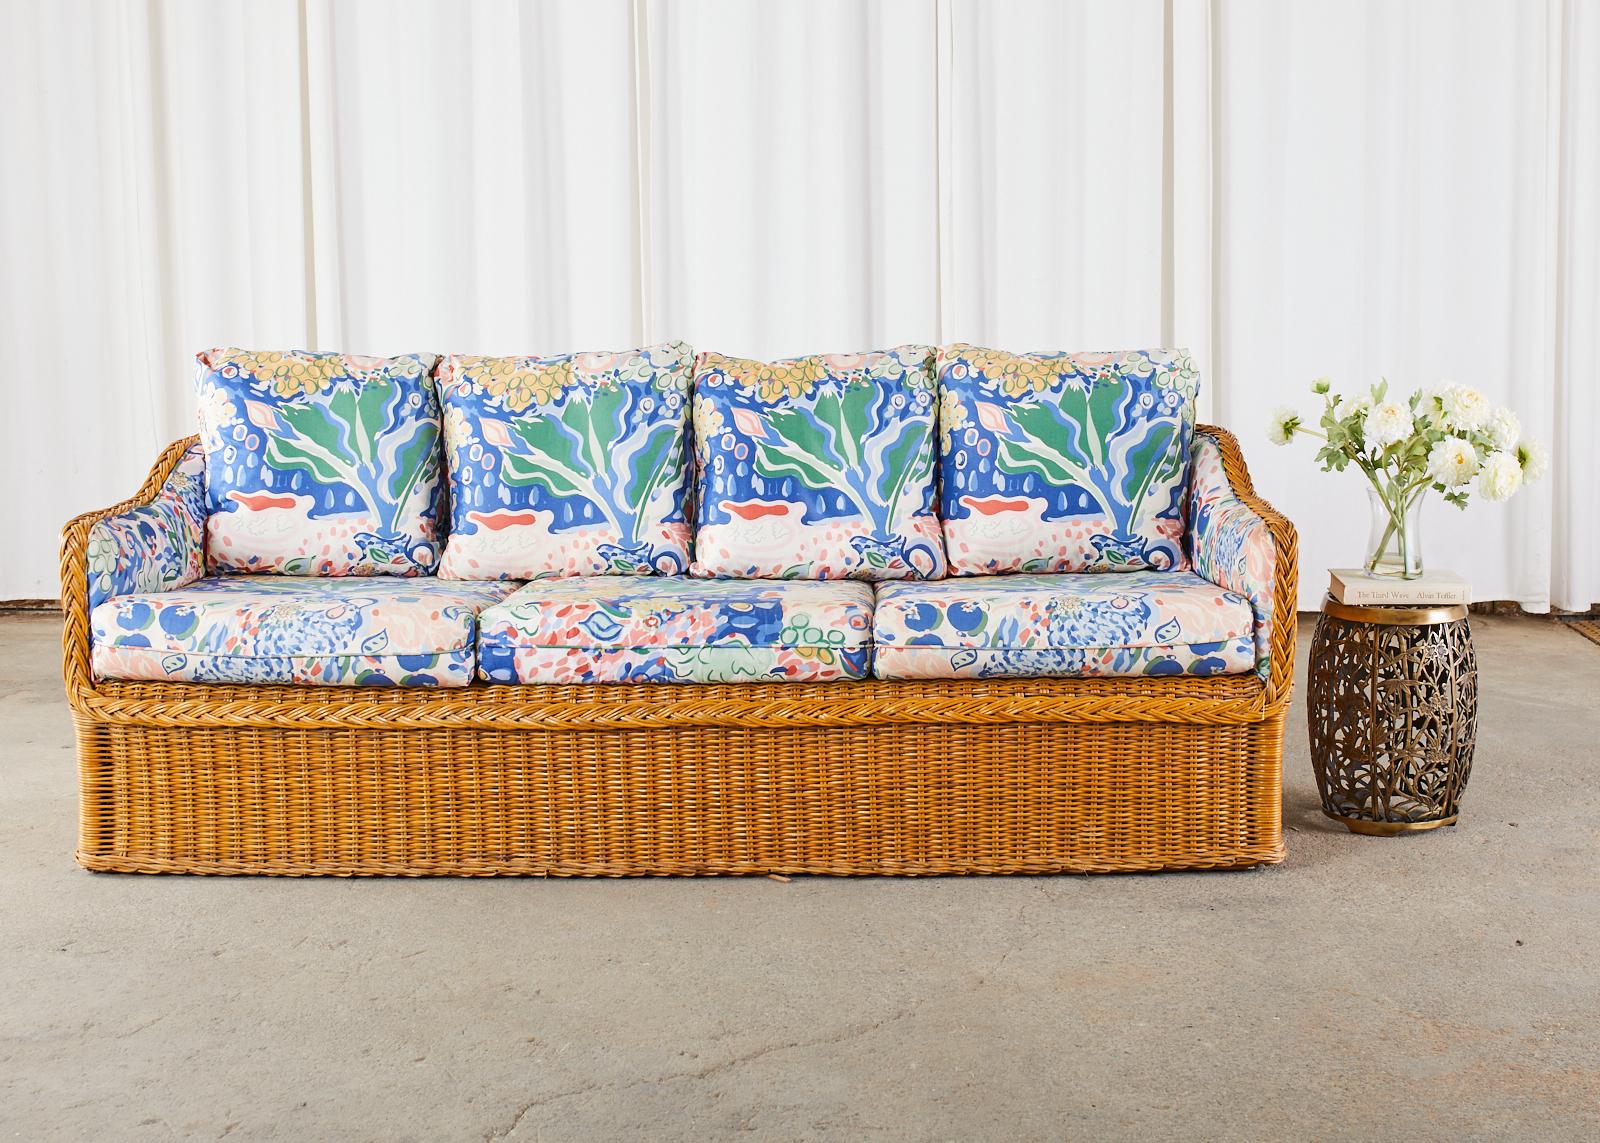 Stylish organic modern sofa made in the manner and style of Michael Taylor. The large 3 seat sofa features a rattan frame covered with woven wicker having a braided border. Upholstered with a colorful vintage fabric in a floral motif. The three seat